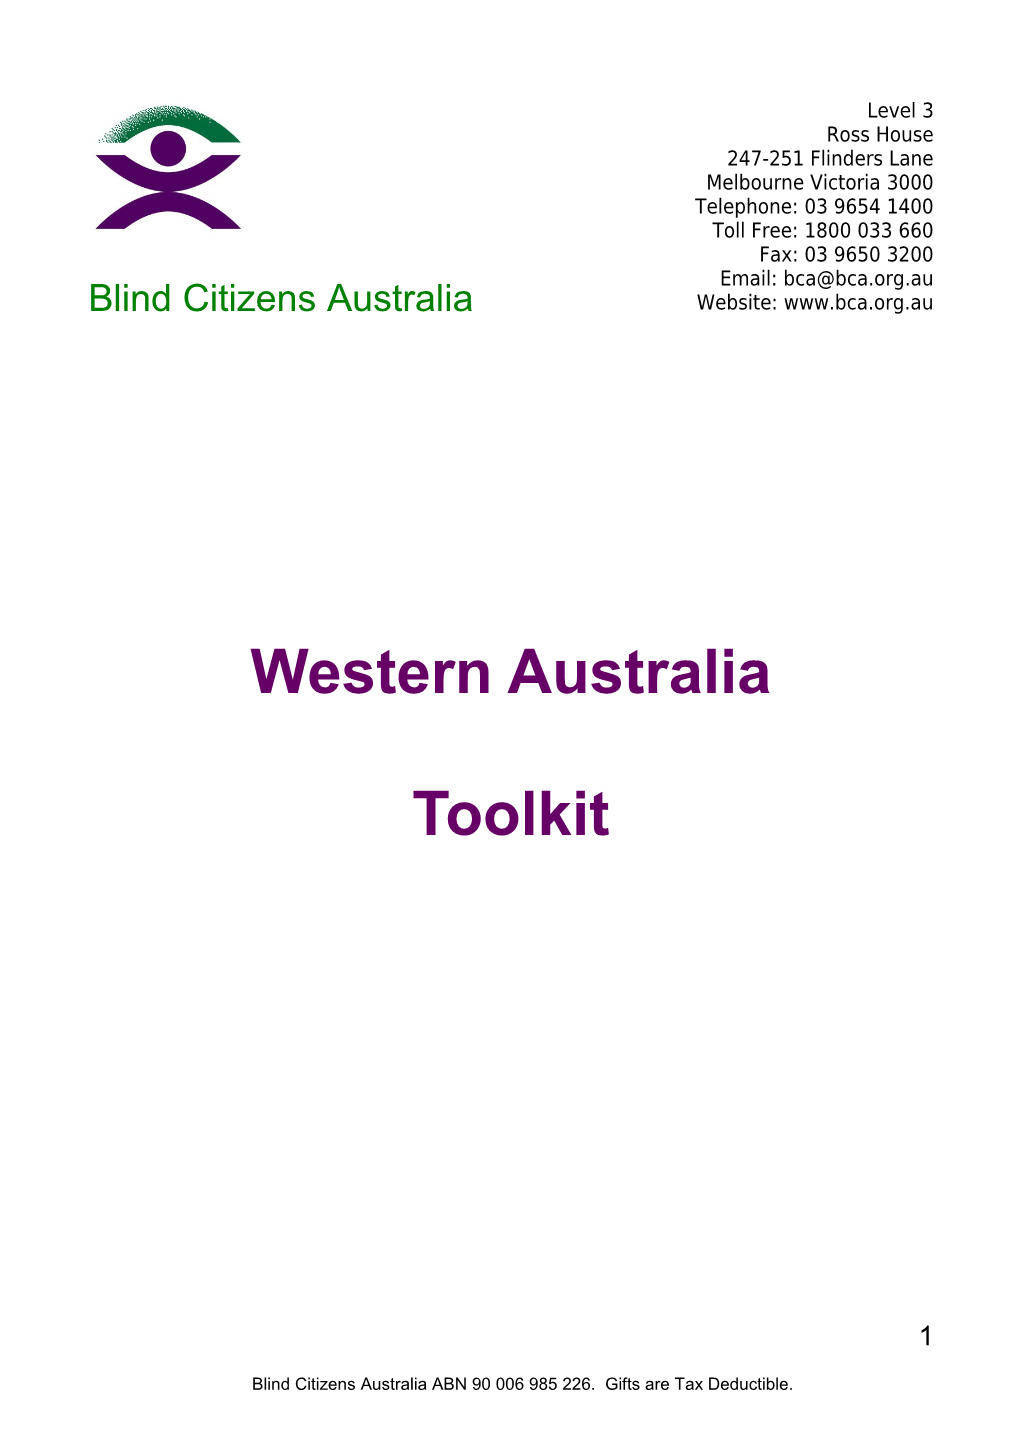 Welcome to BCA S Western Australia Toolkit